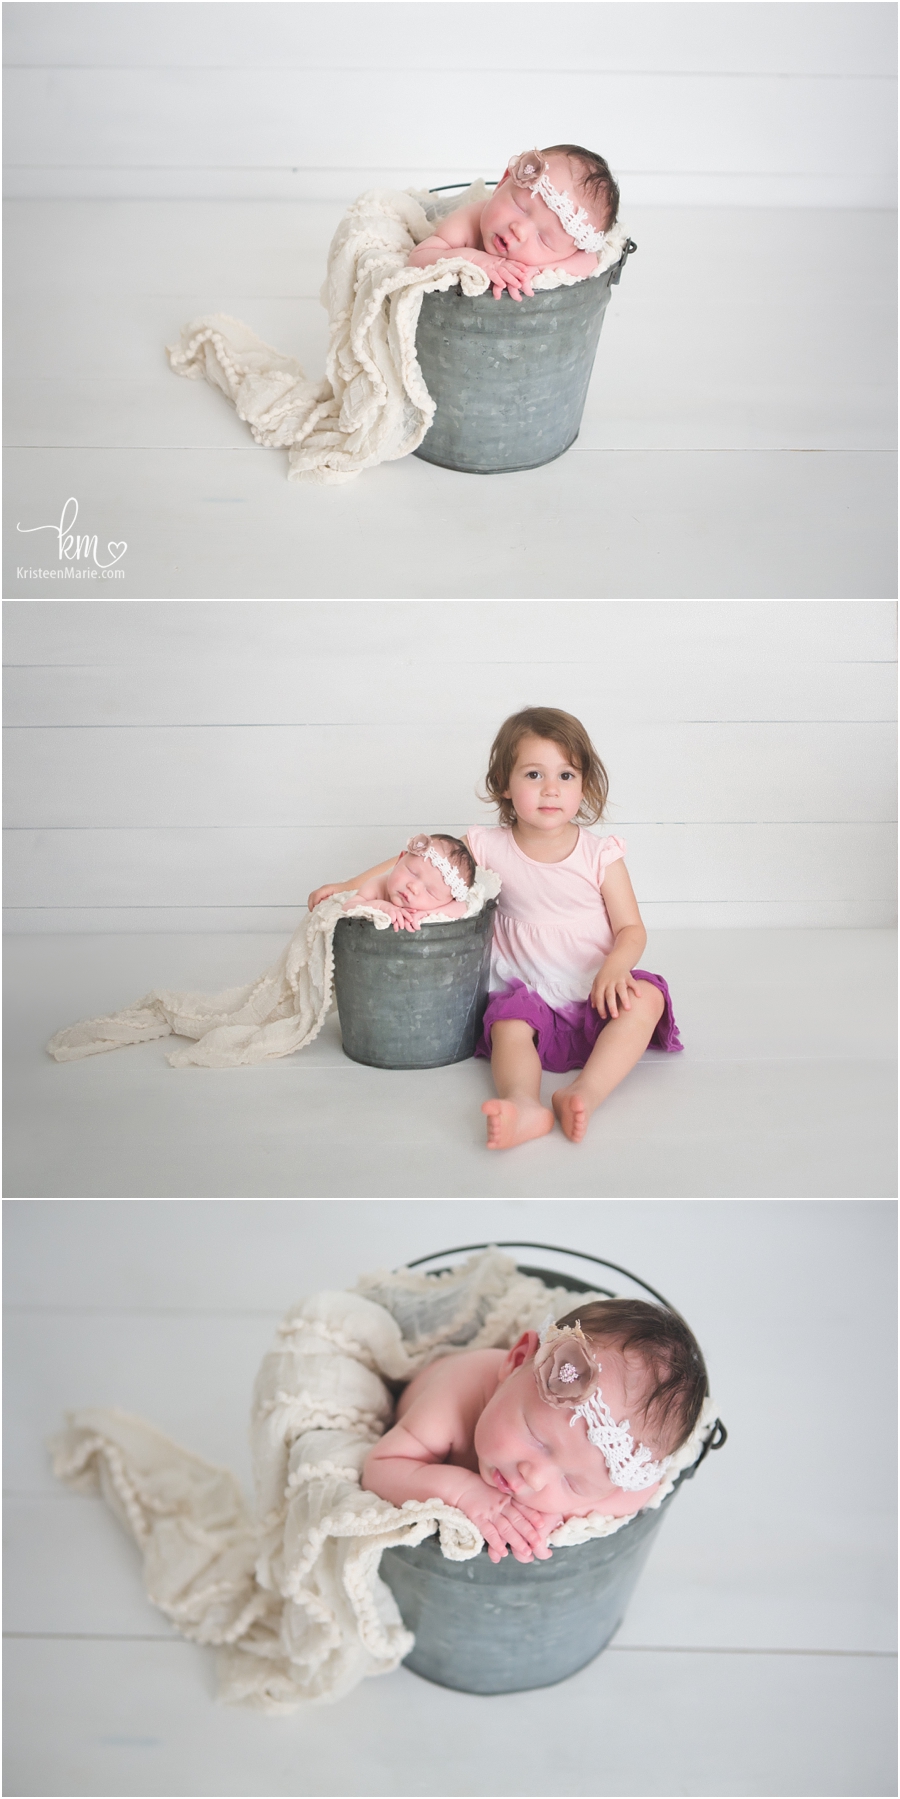 baby in a bucket and newborn baby with sister